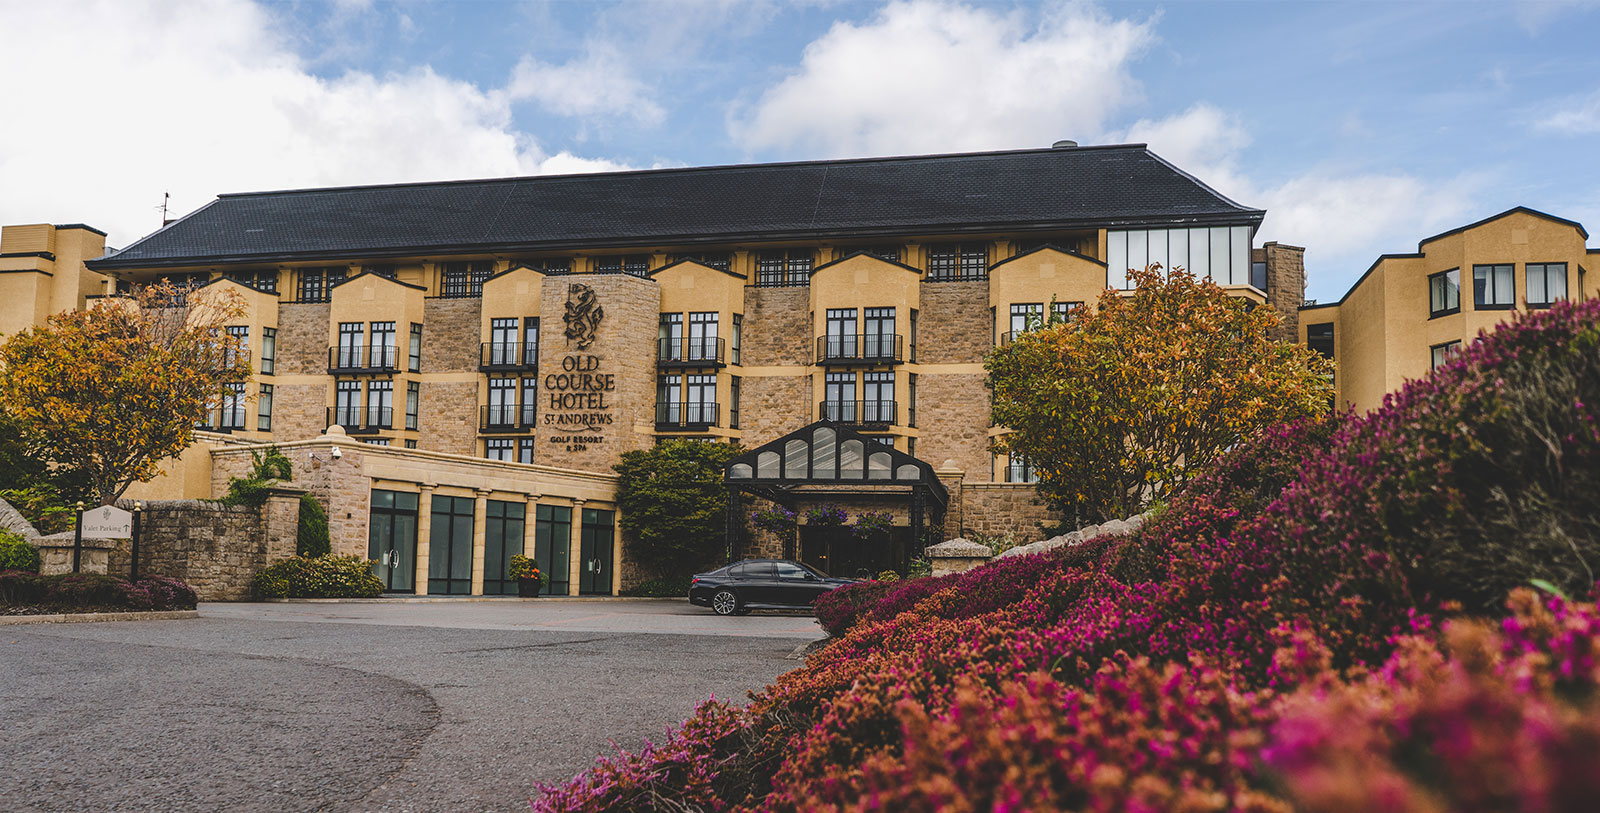 Image of Hotel Exterior at Old Course Hotel, Golf Resort & Spa, 15th Century, Member of Historic Hotels Worldwide, in St. Andrews, Scotland, Special Offers, Discounted Rates, Families, Romantic Escape, Honeymoons, Anniversaries, Reunions